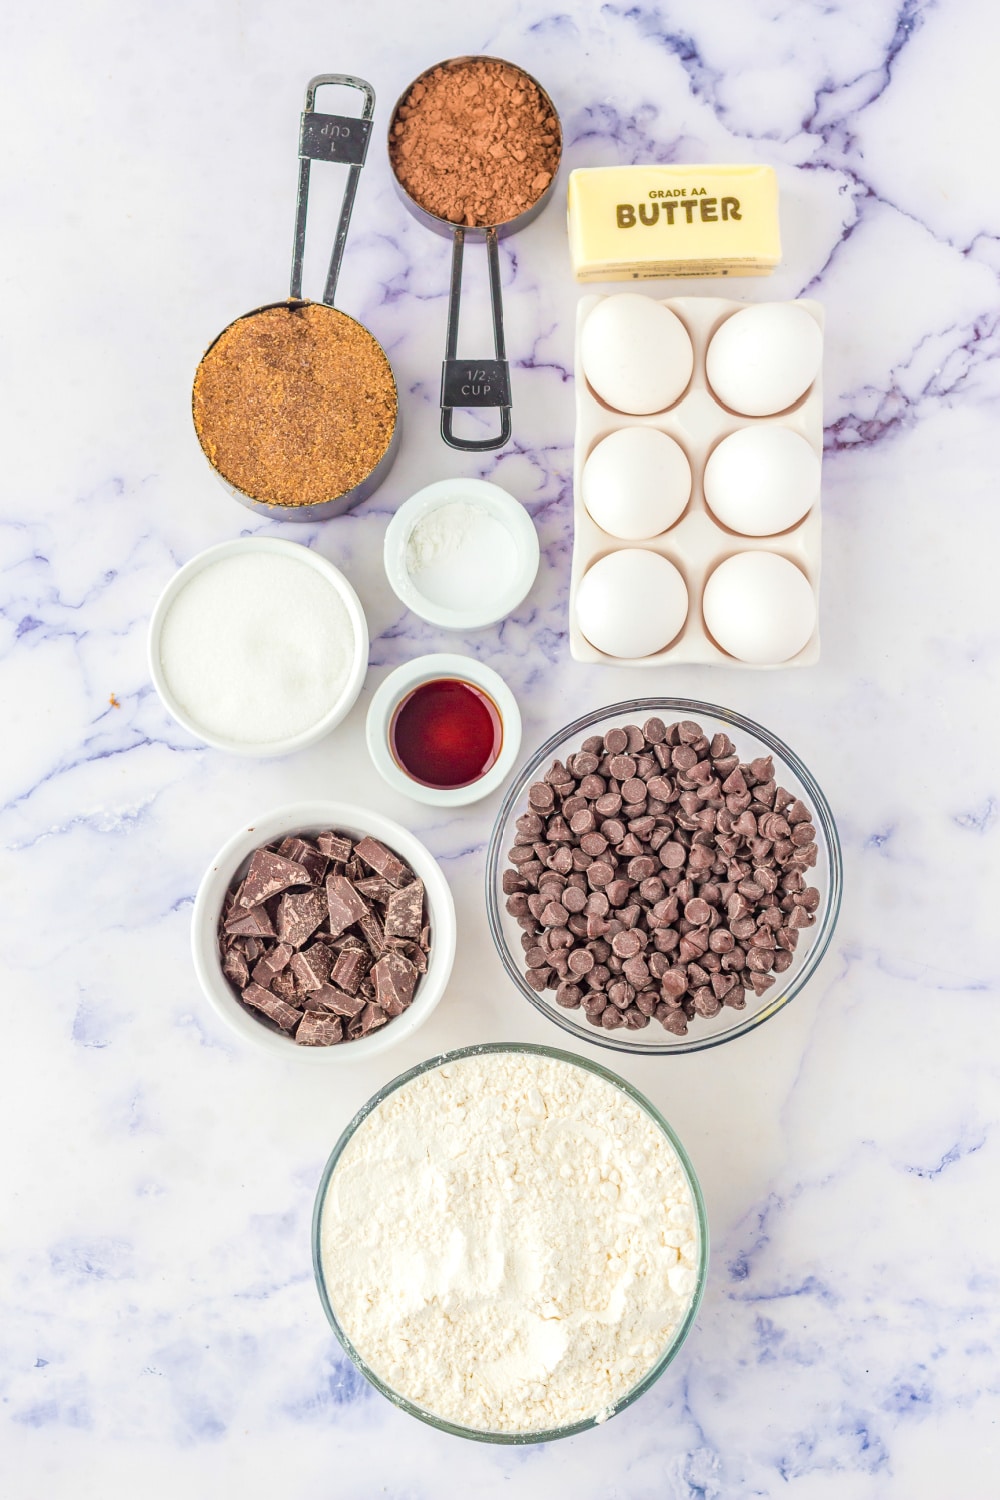 Measured Ingredients needed to make these cookies presented on a white marble countertop.